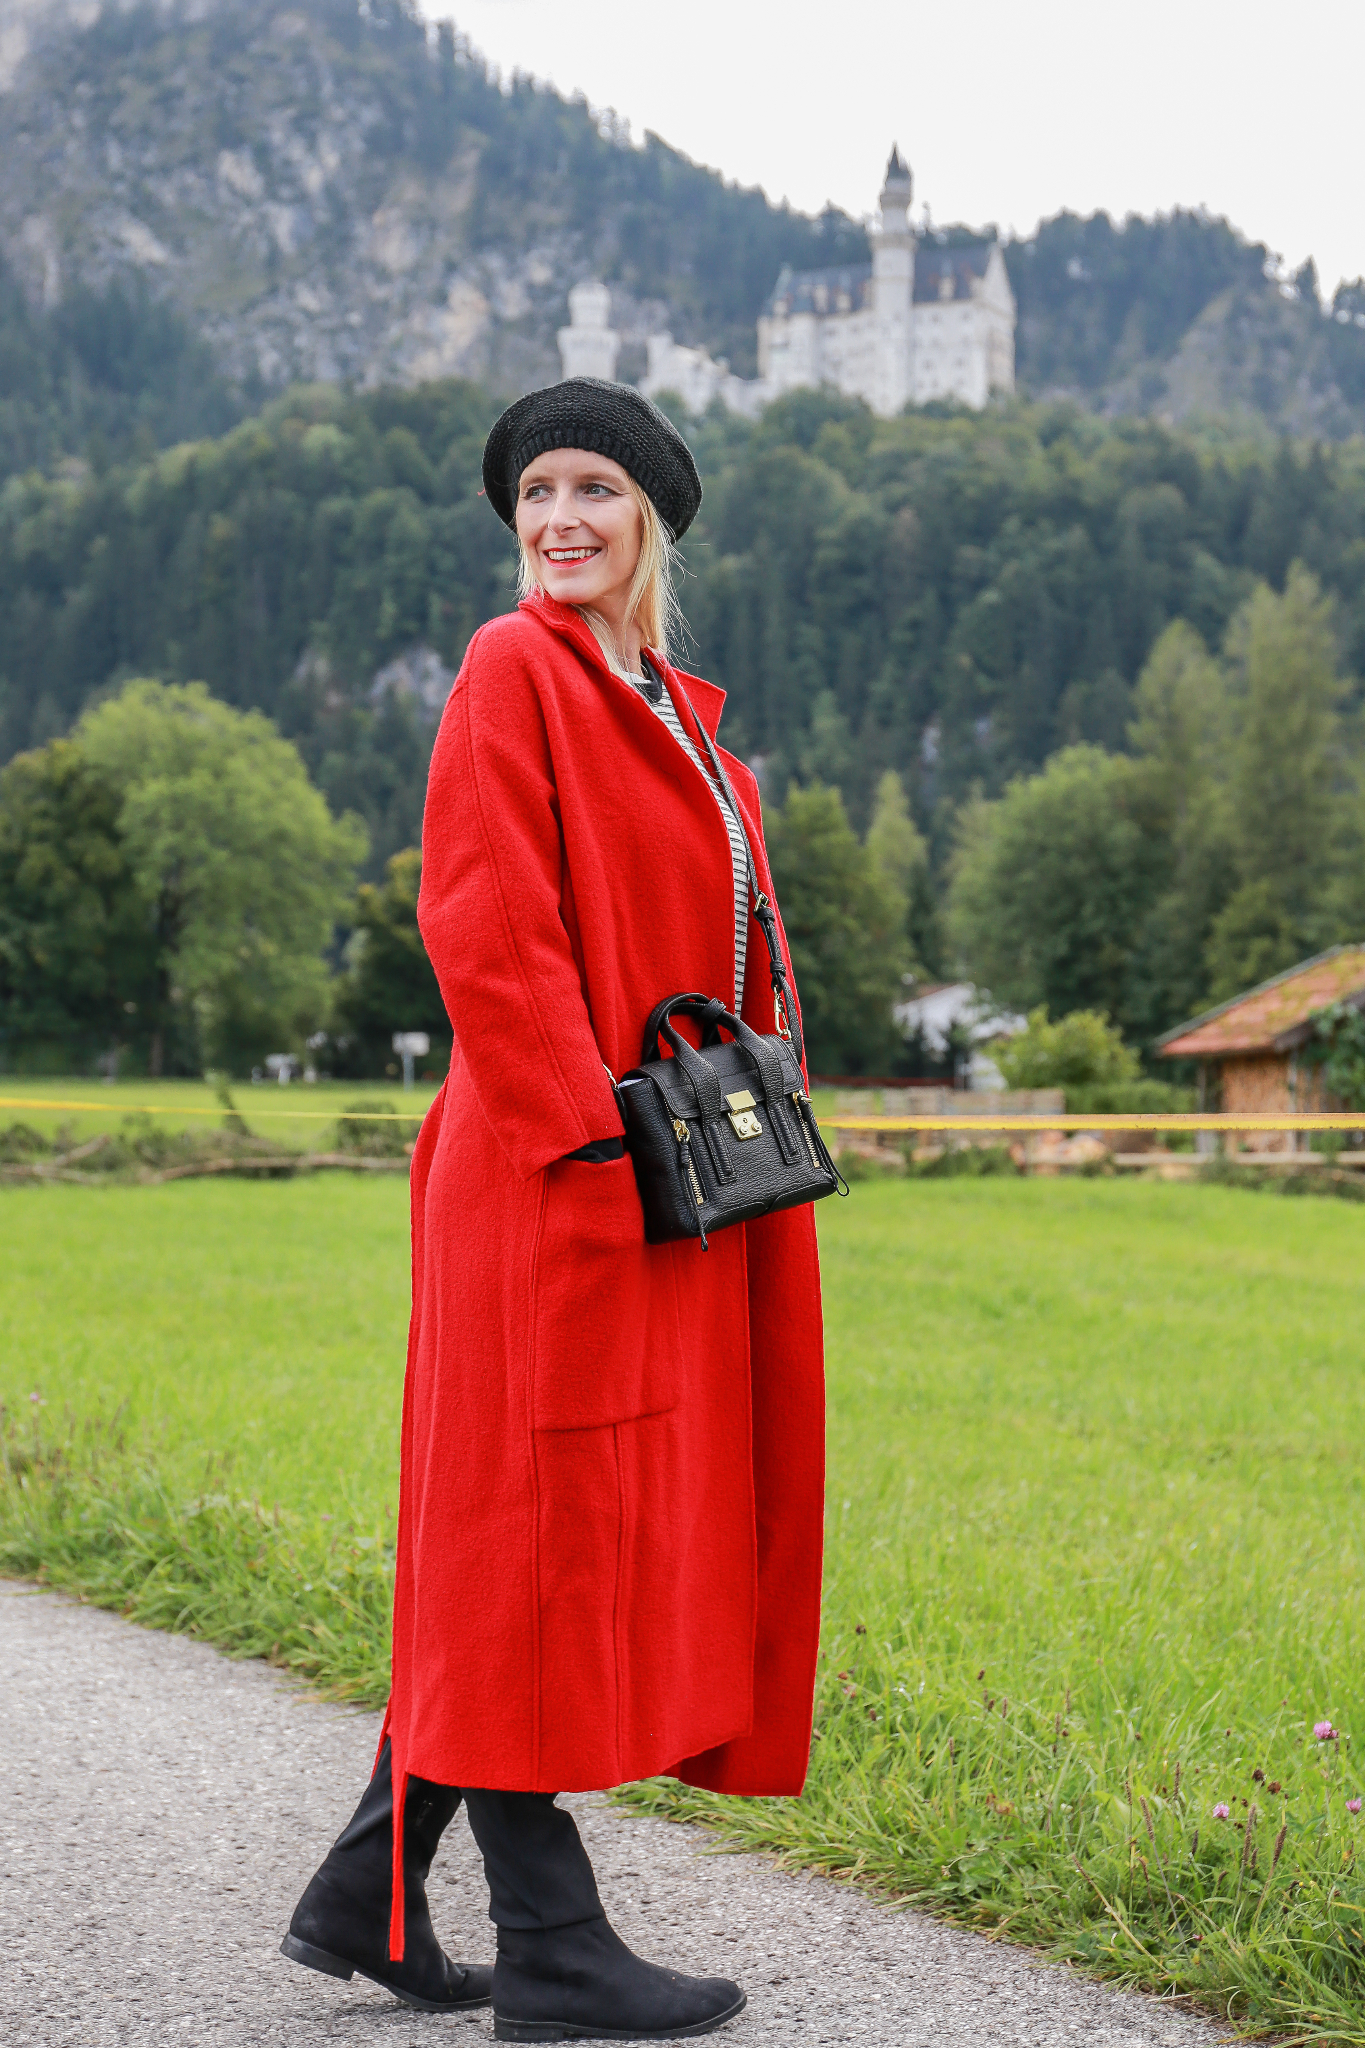 Fashion_Outfit_Red_Riding_Hood-6